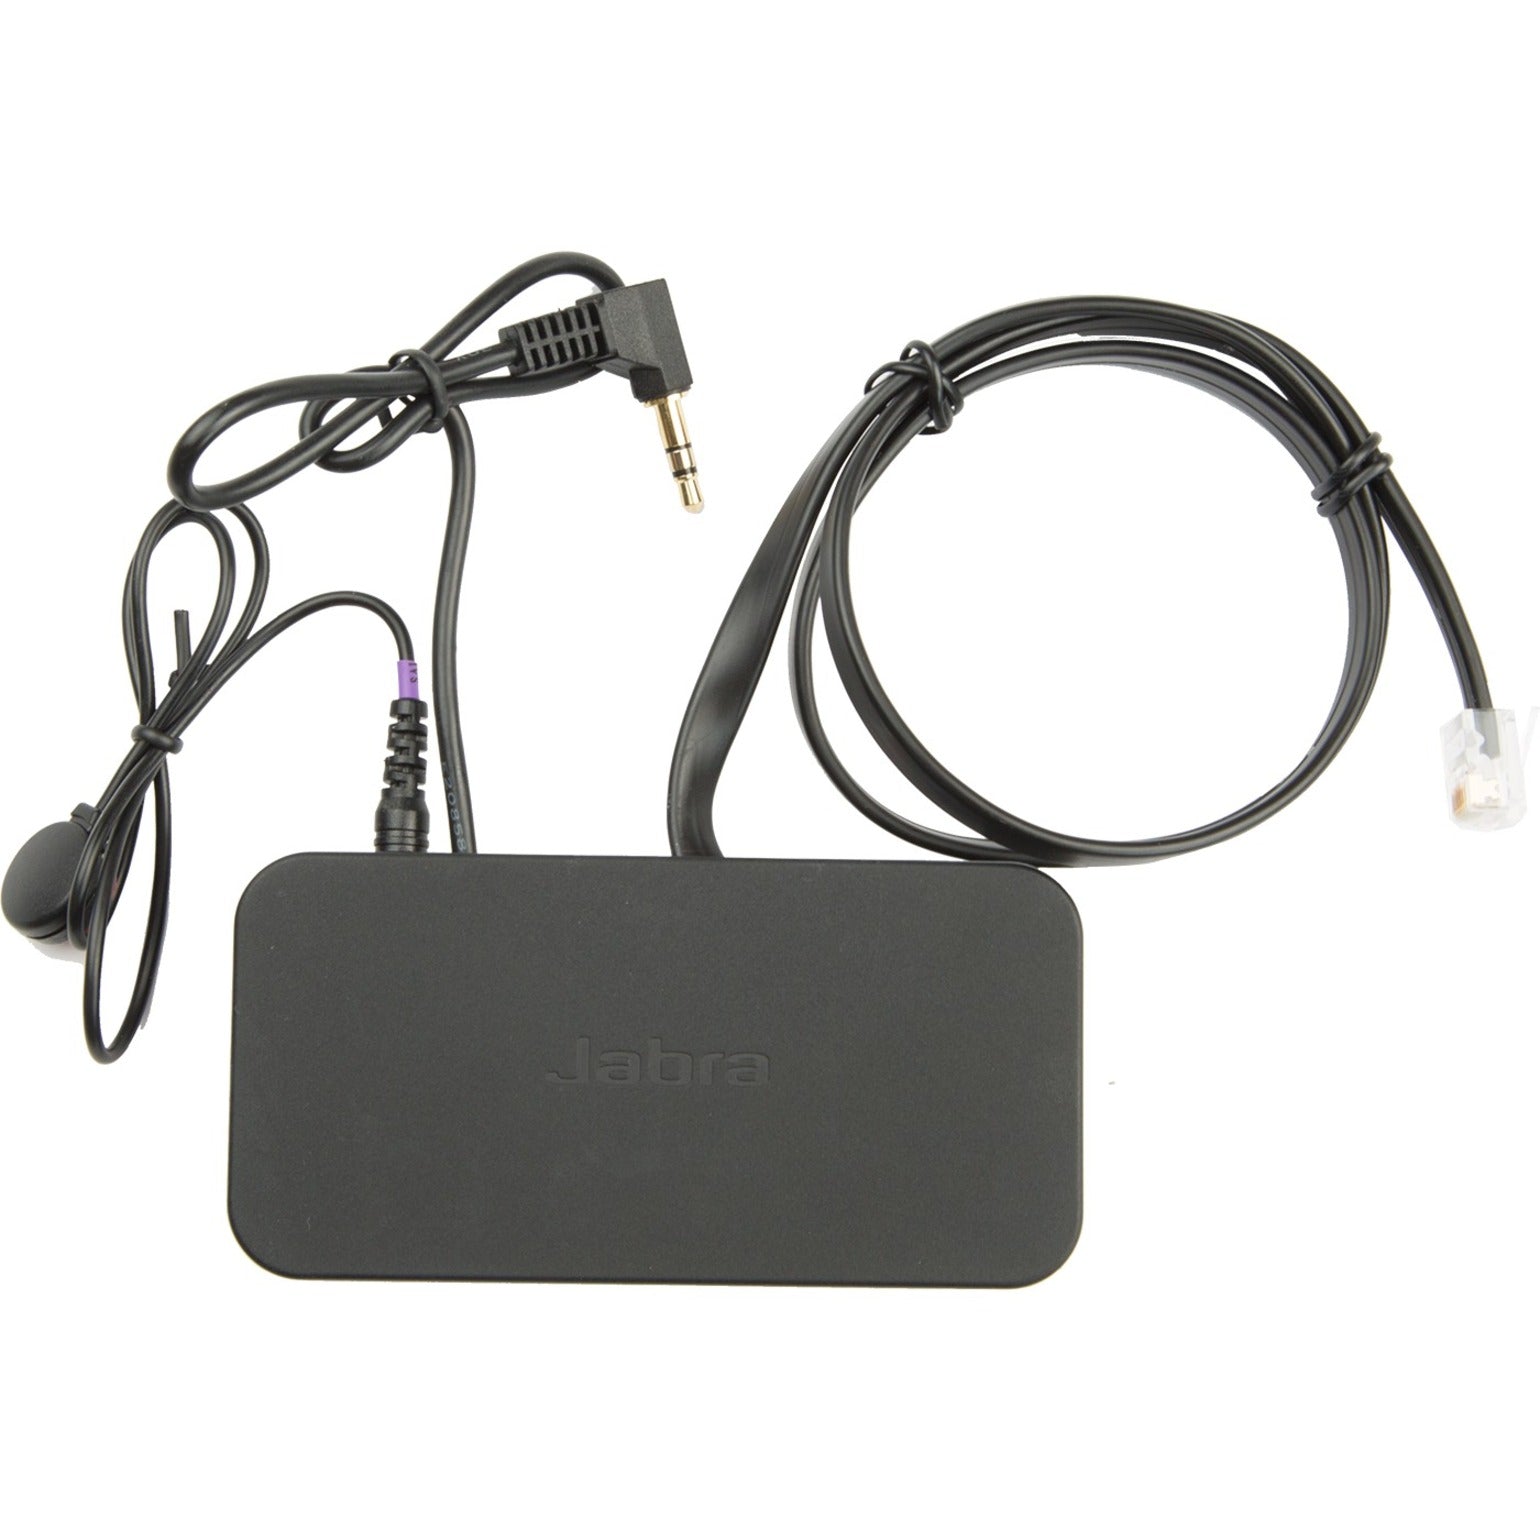 Jabra 14201-20 Electronic Hook Switch, Compatible with Alcatel Phones and Jabra Headsets